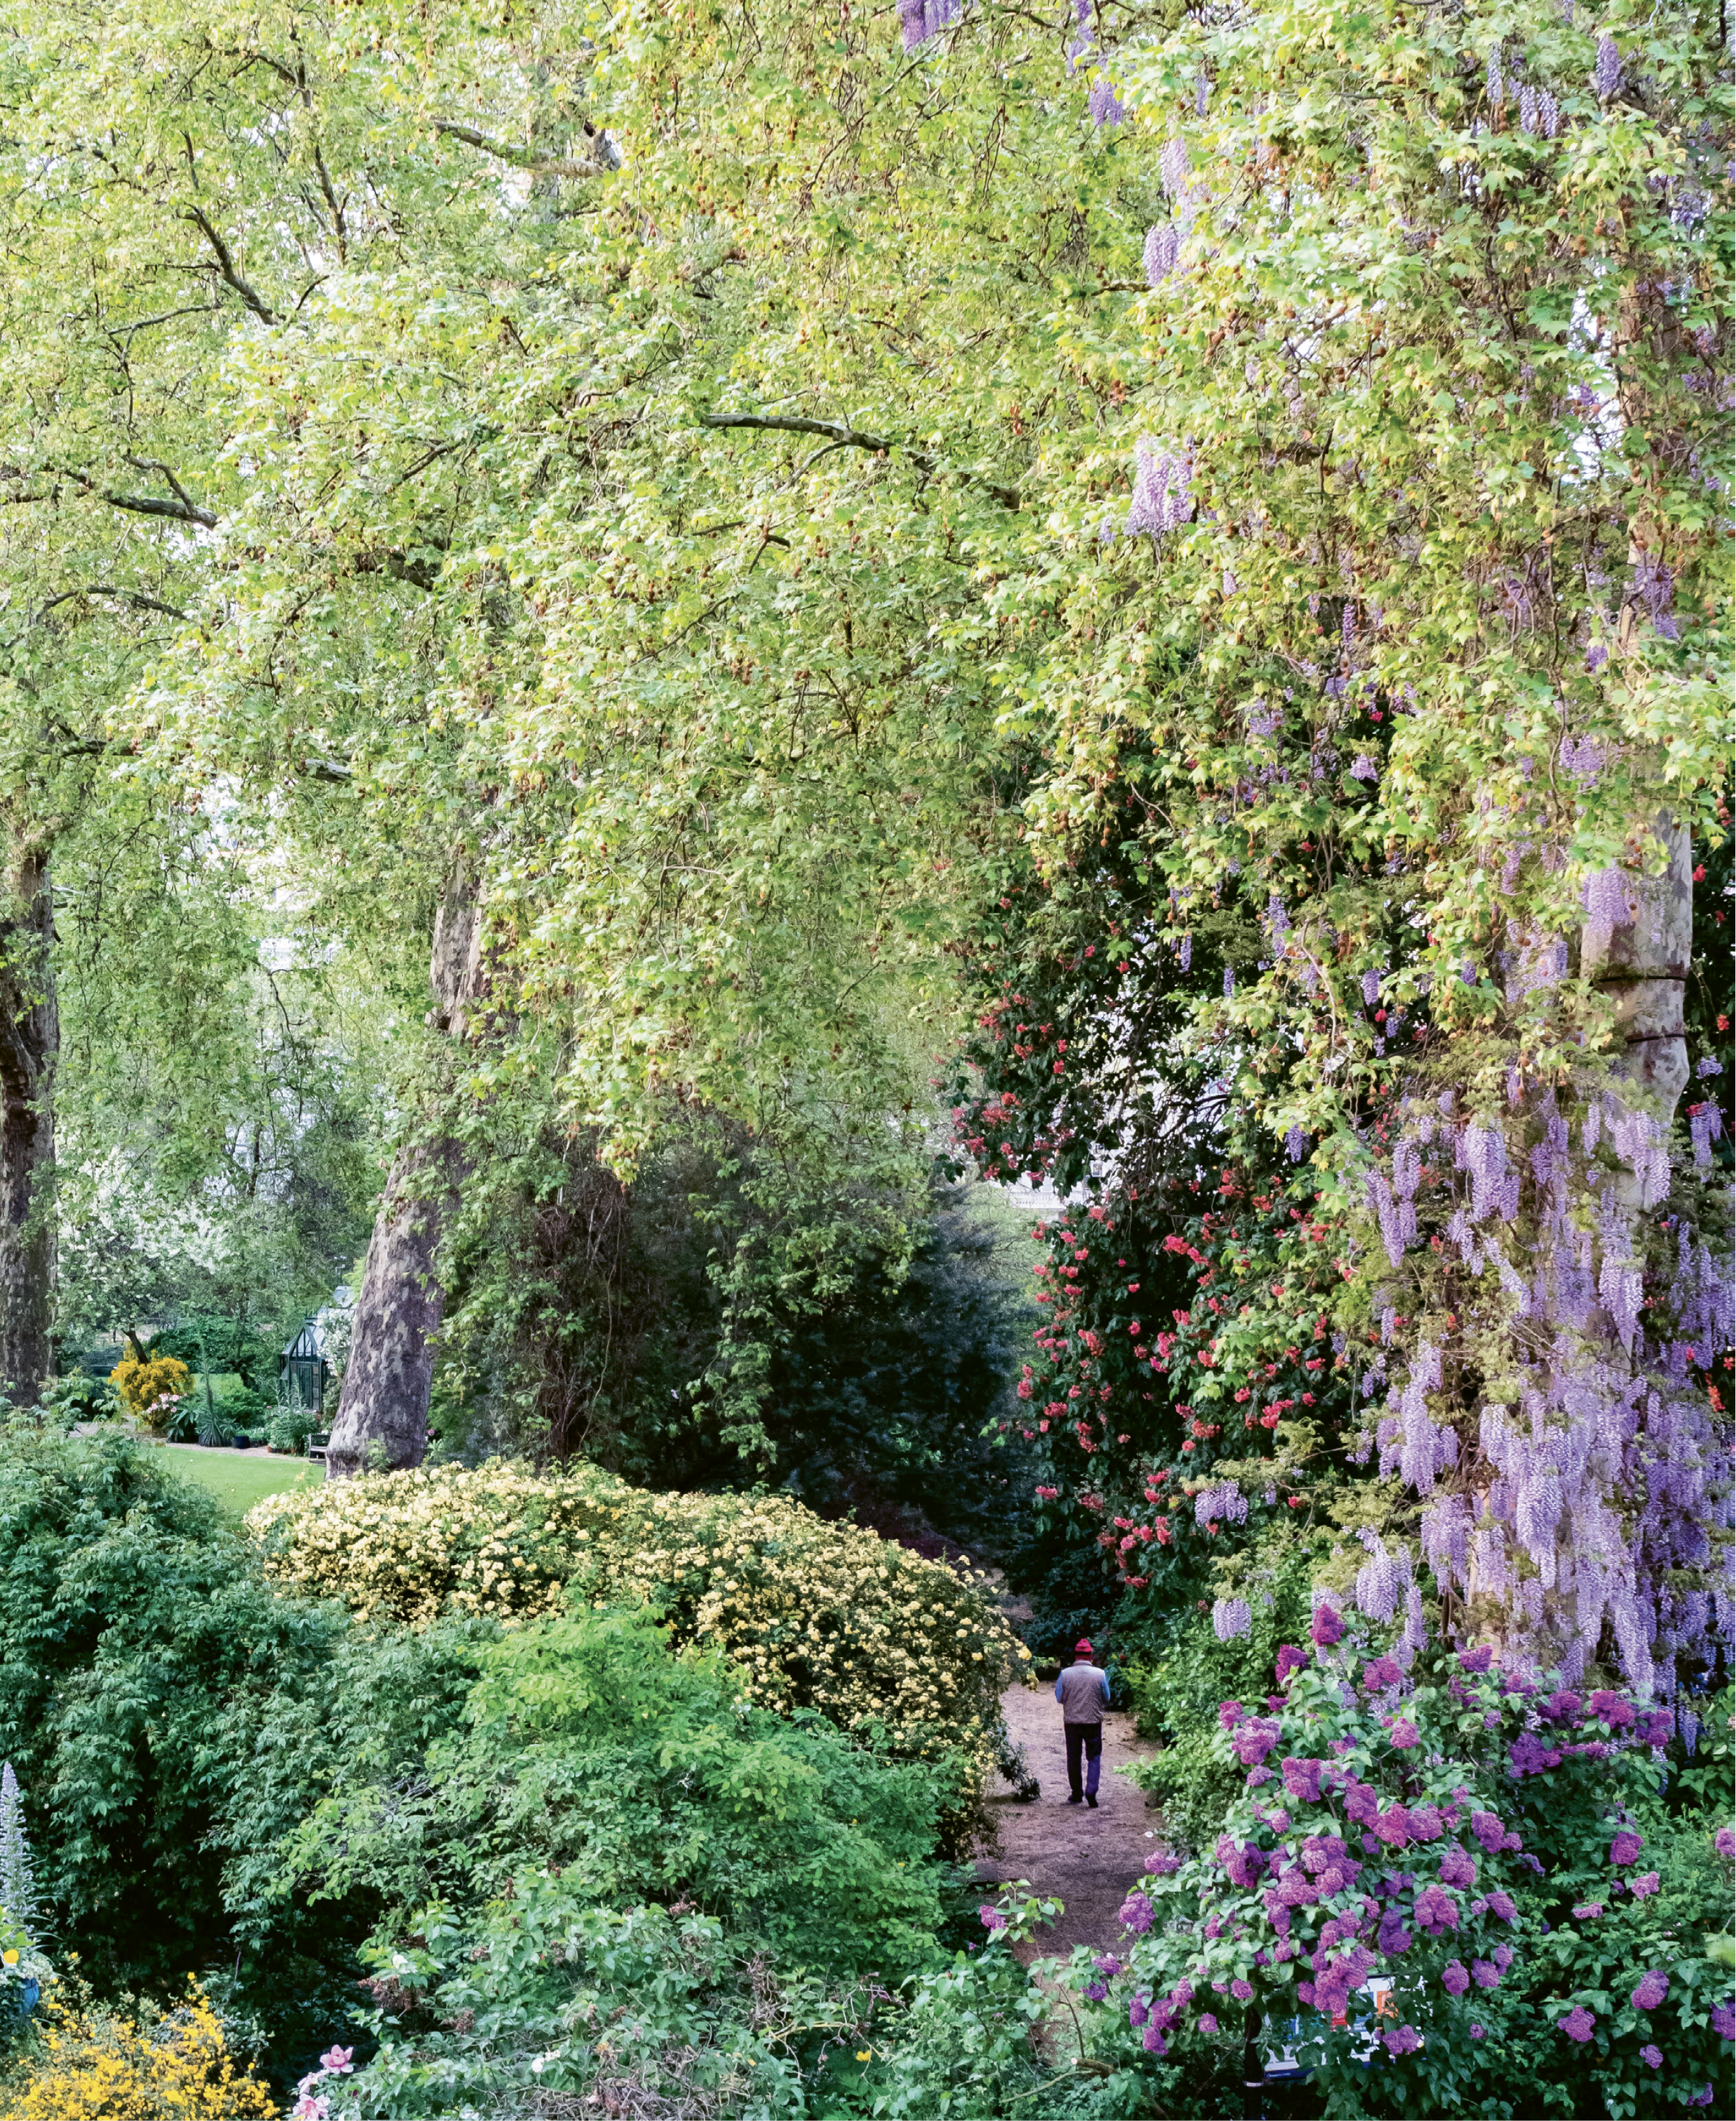 A pathway view of the gardens of Eccleston Square from the Eccleston Square Hotel